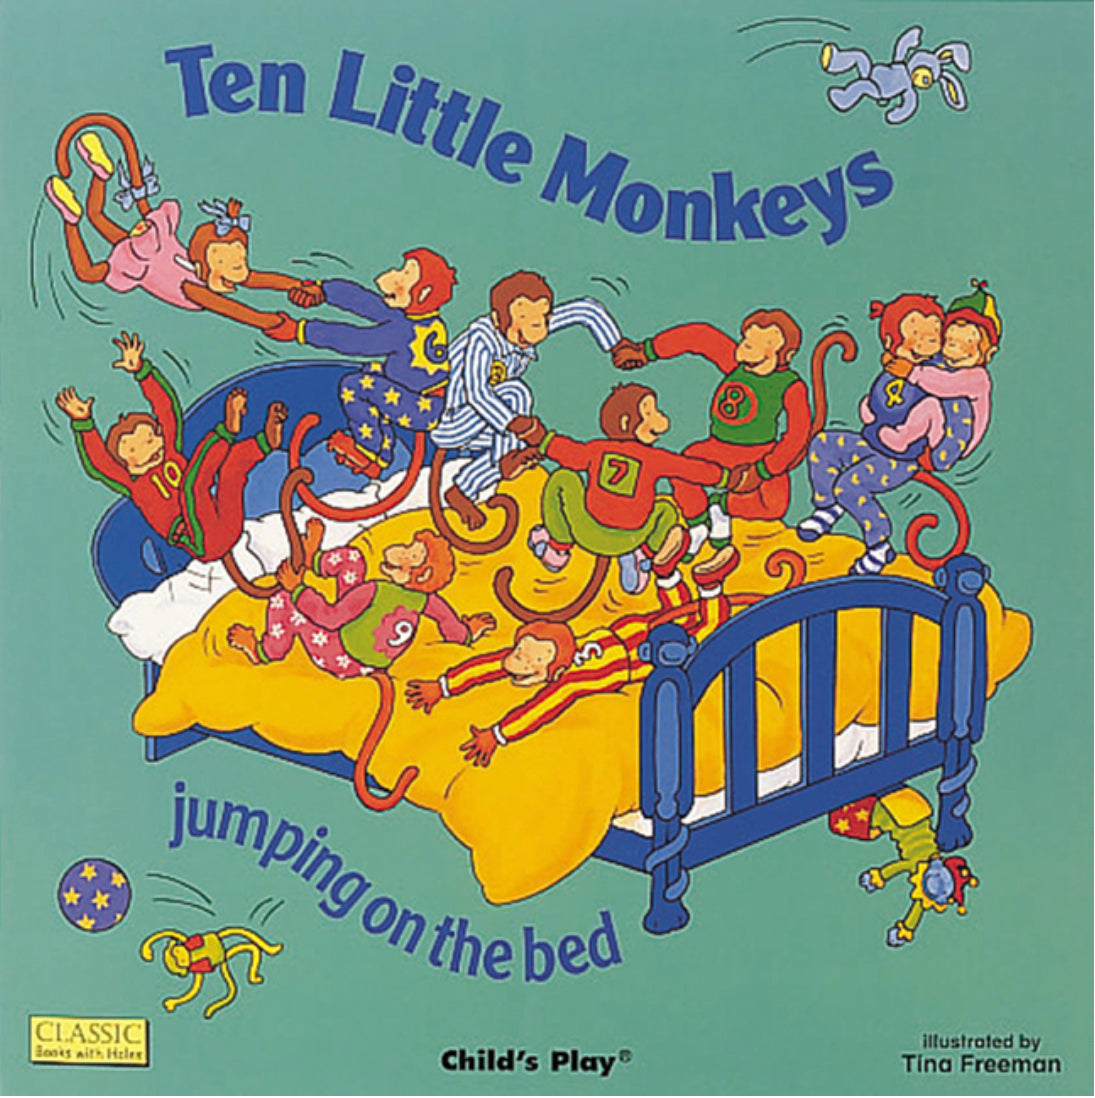 Ten Little Monkeys: Jumping on the Bed (Classic Books with Holes Soft Cover), Tina Freeman